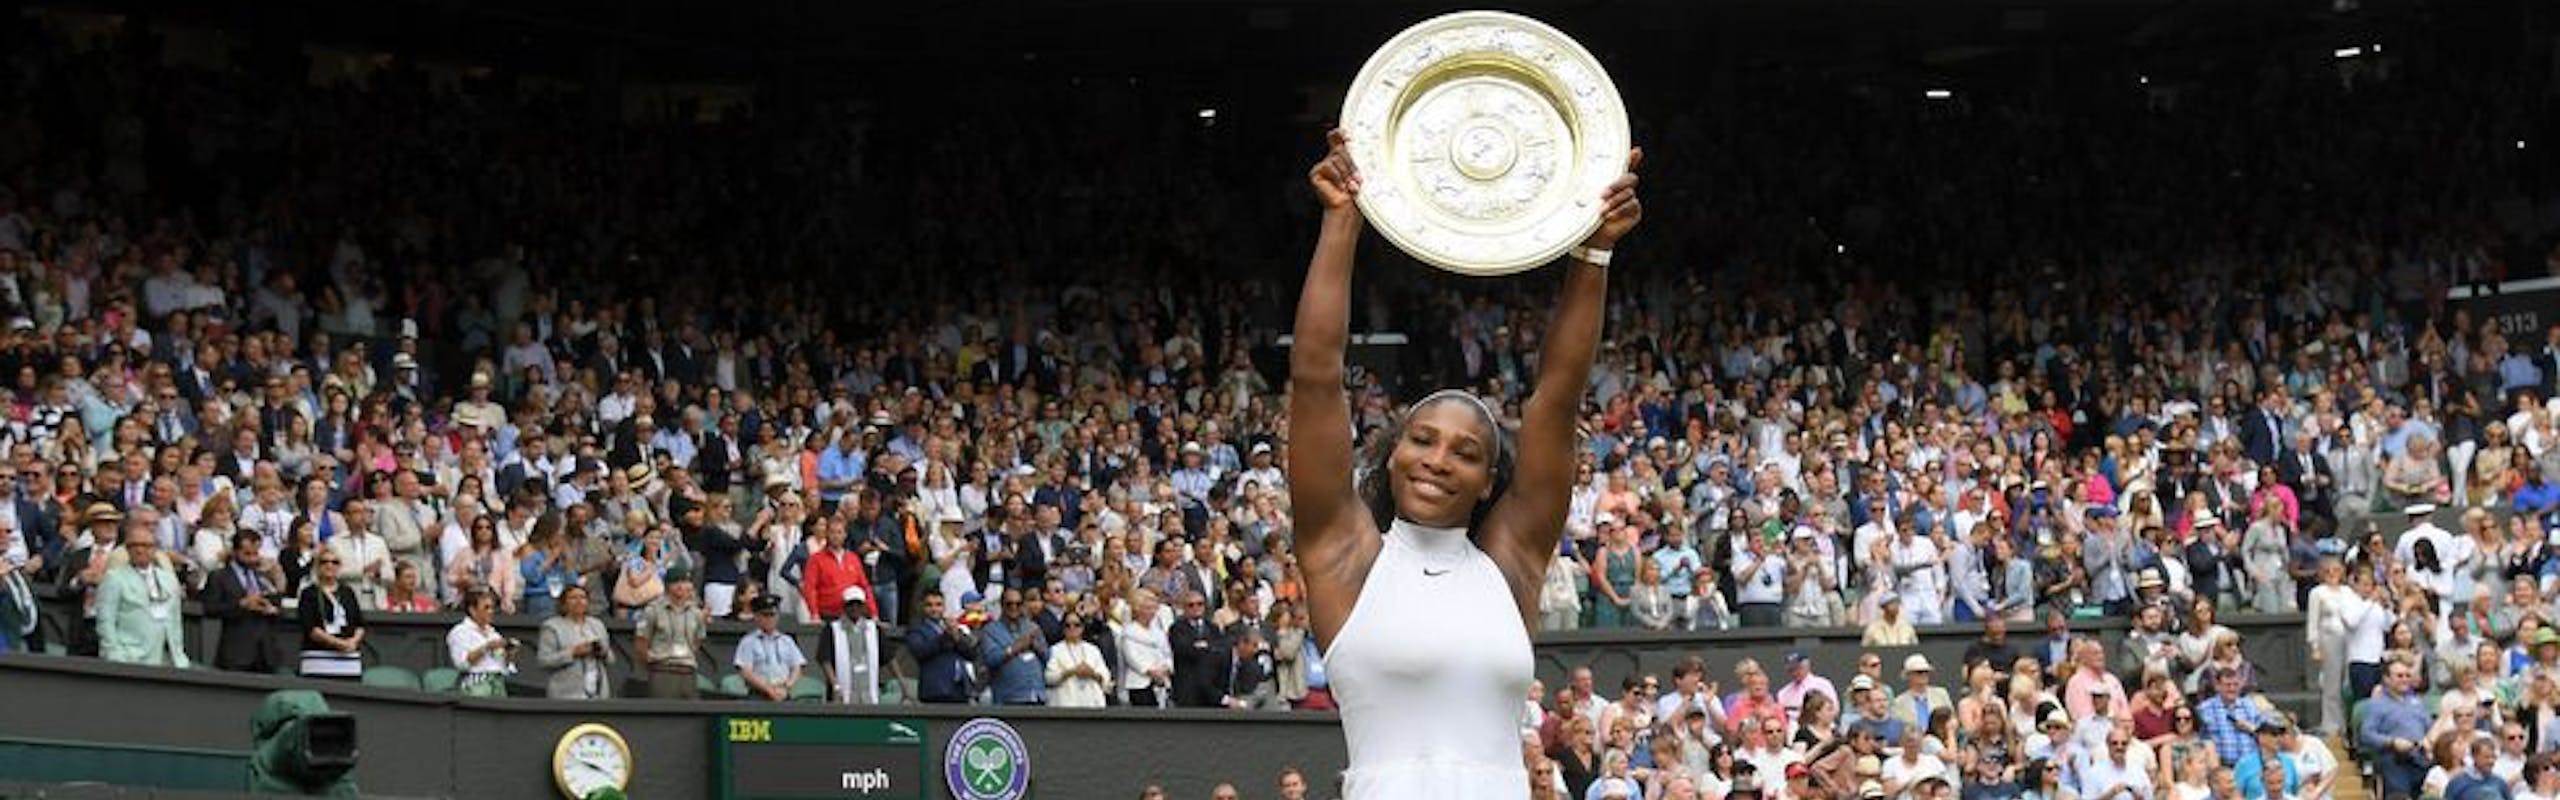 serena williams holding her trophy after wimbledon 2016 in a white dress